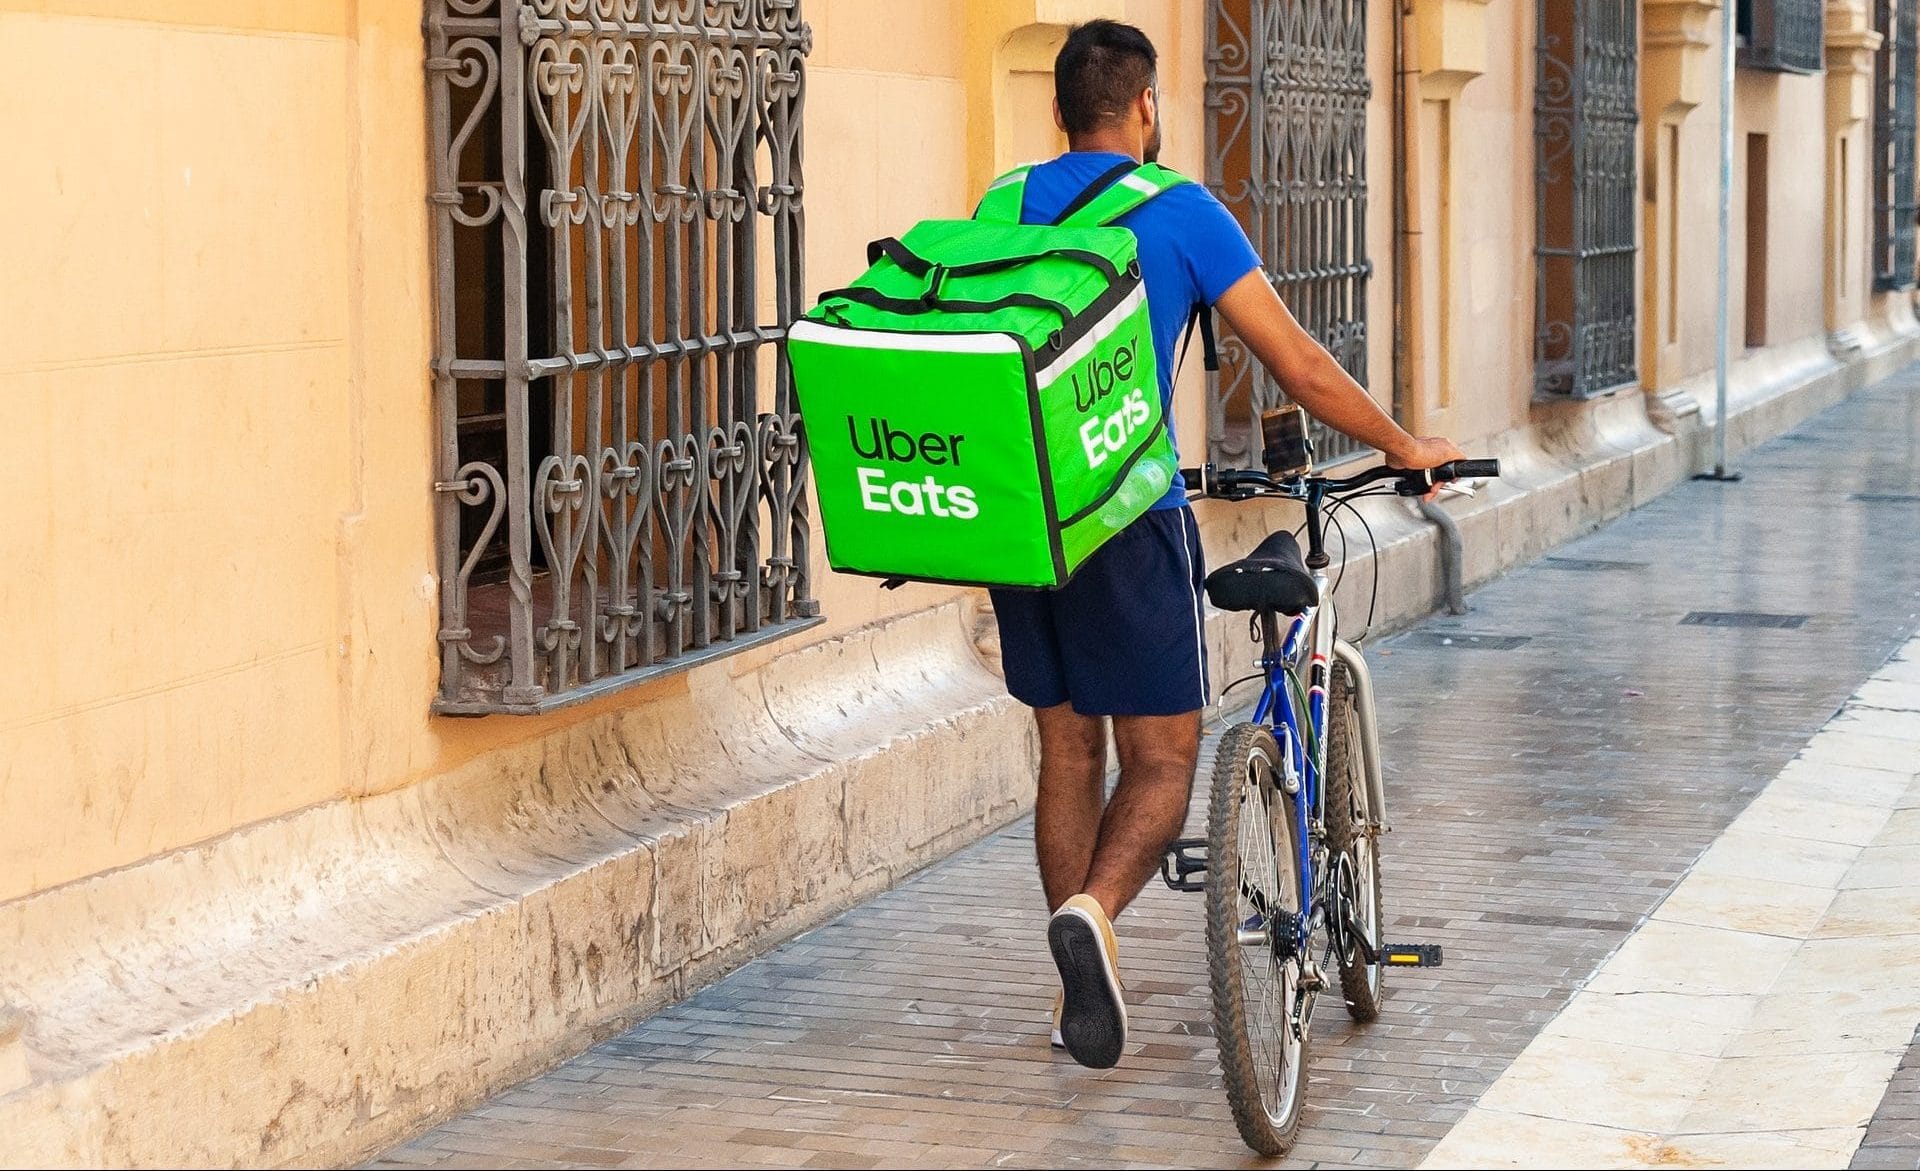 Third party delivery companies, such as Uber Eats, are disruptors that bring specific benefits to the clients they serve.